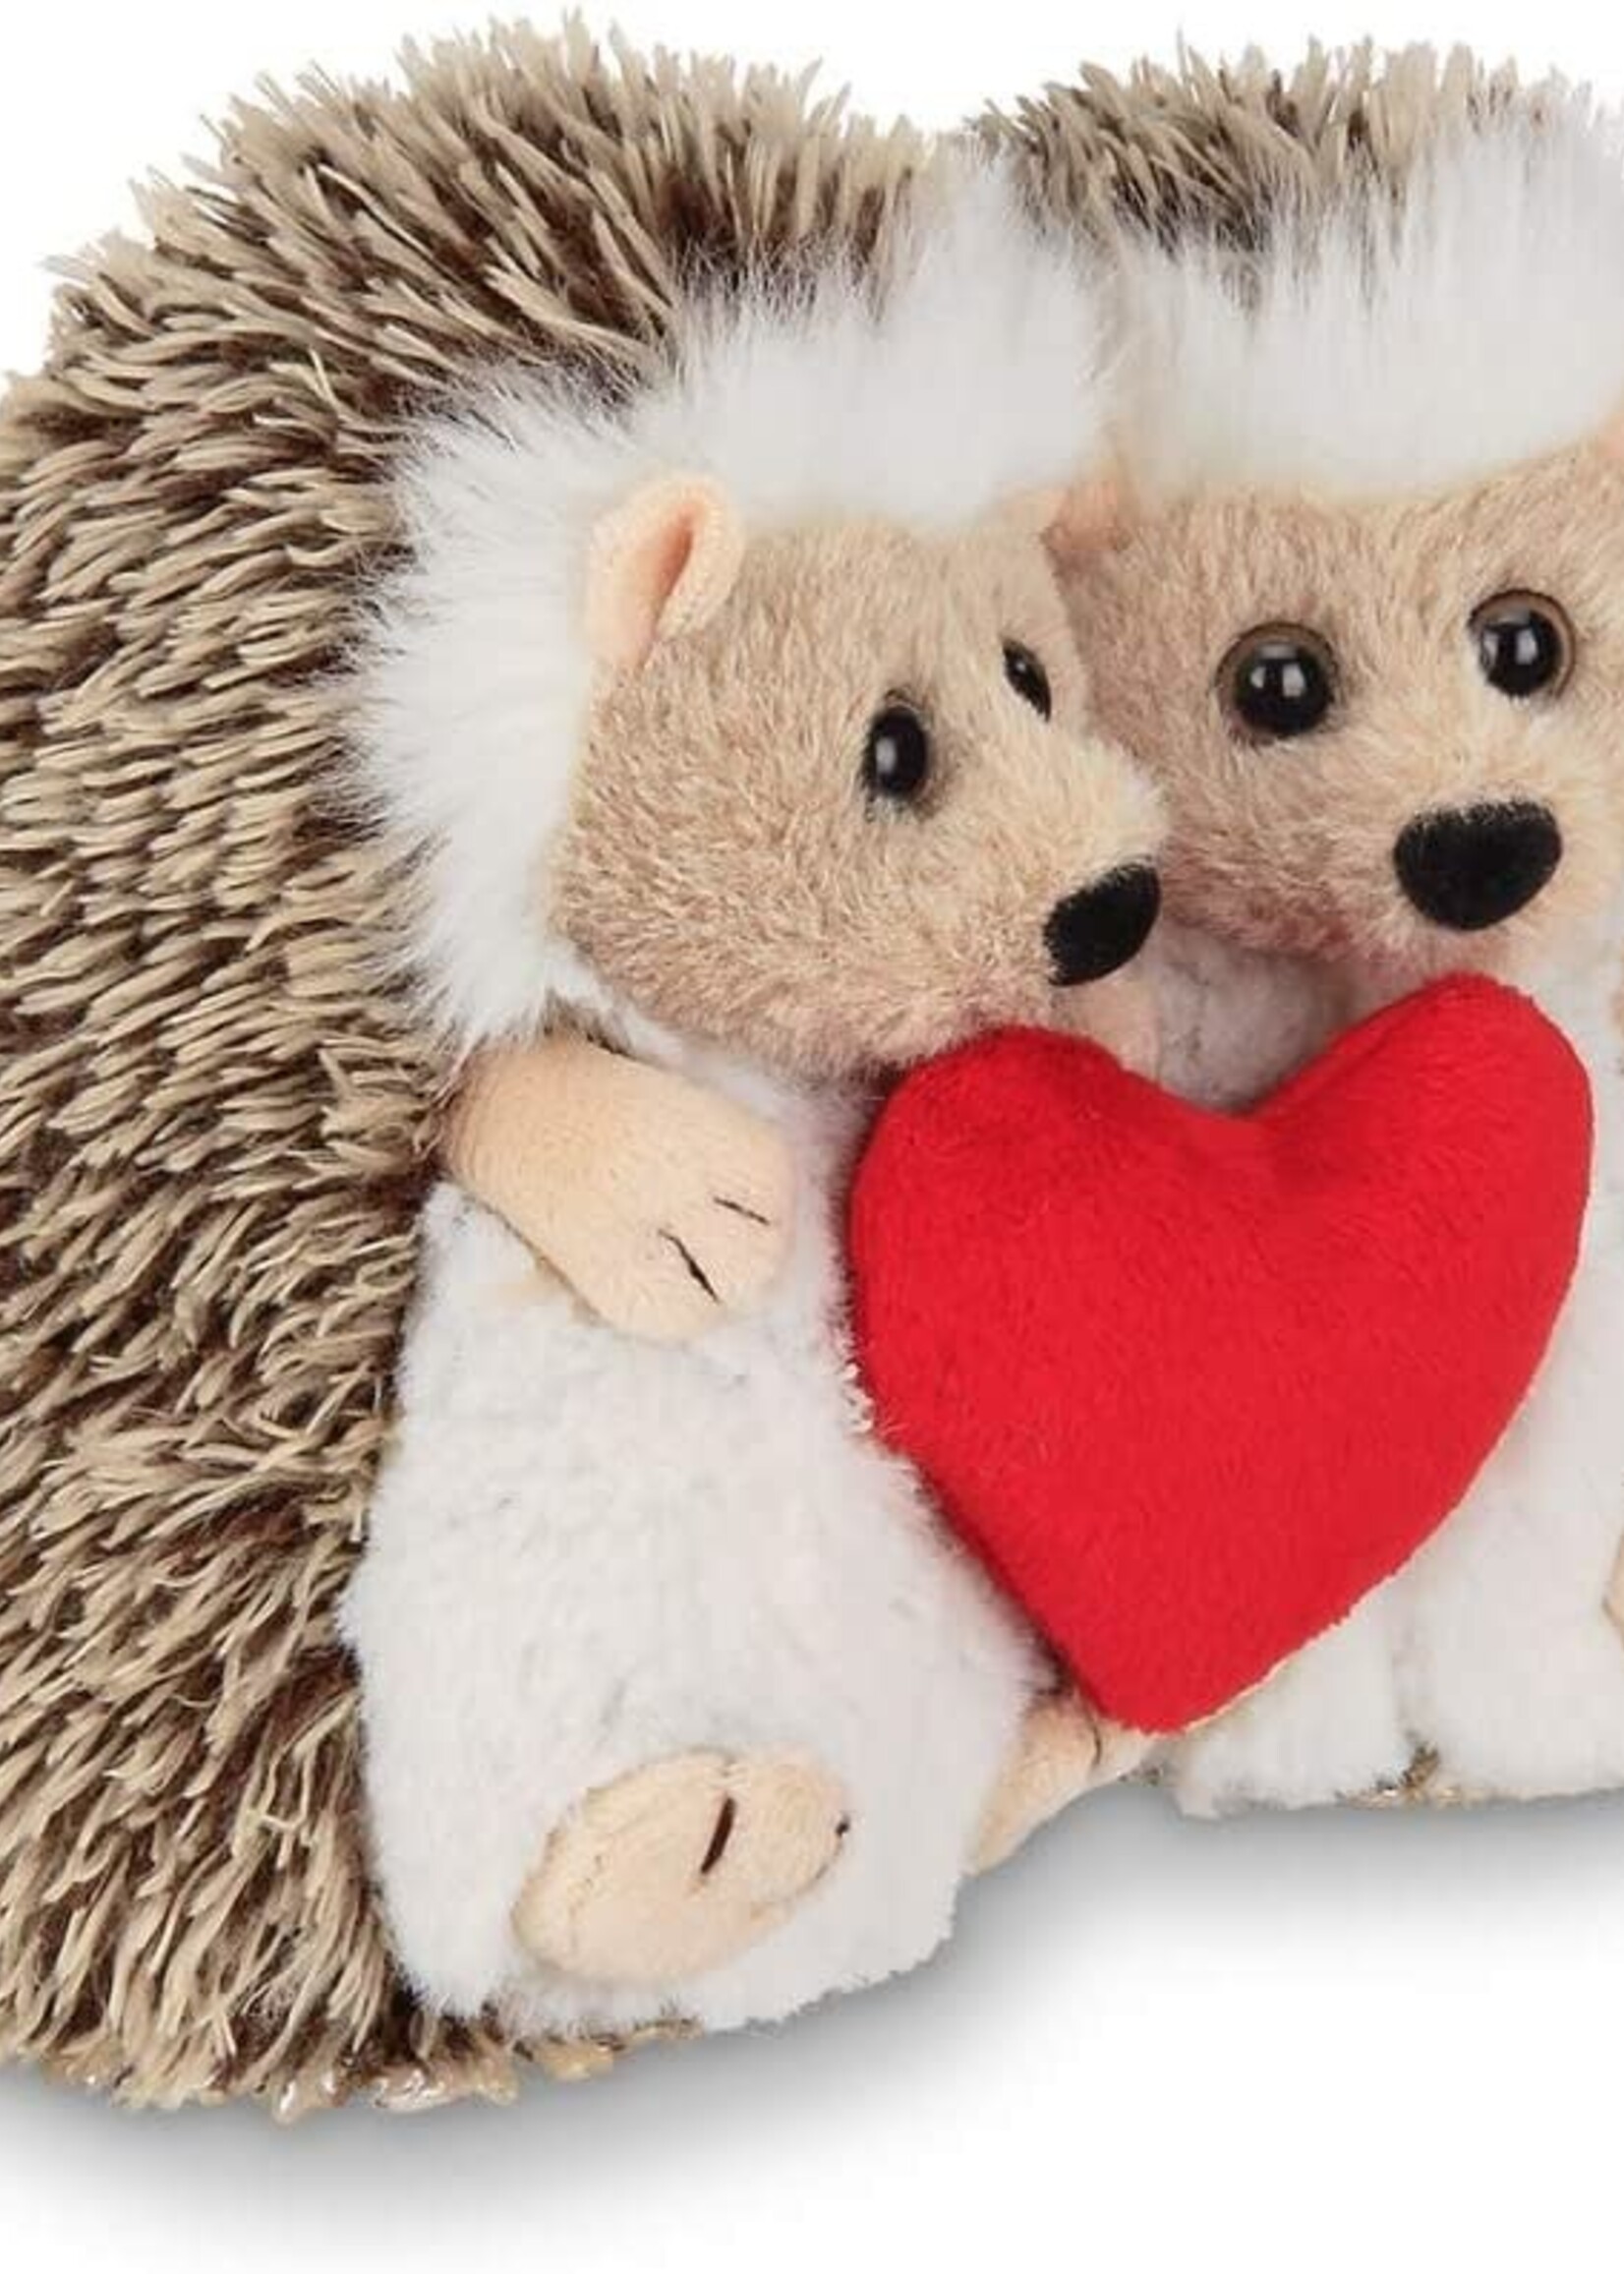 Lovie and Dovey Plush Stuffed Animal Hedgehogs Holding Heart, 5.5 inches